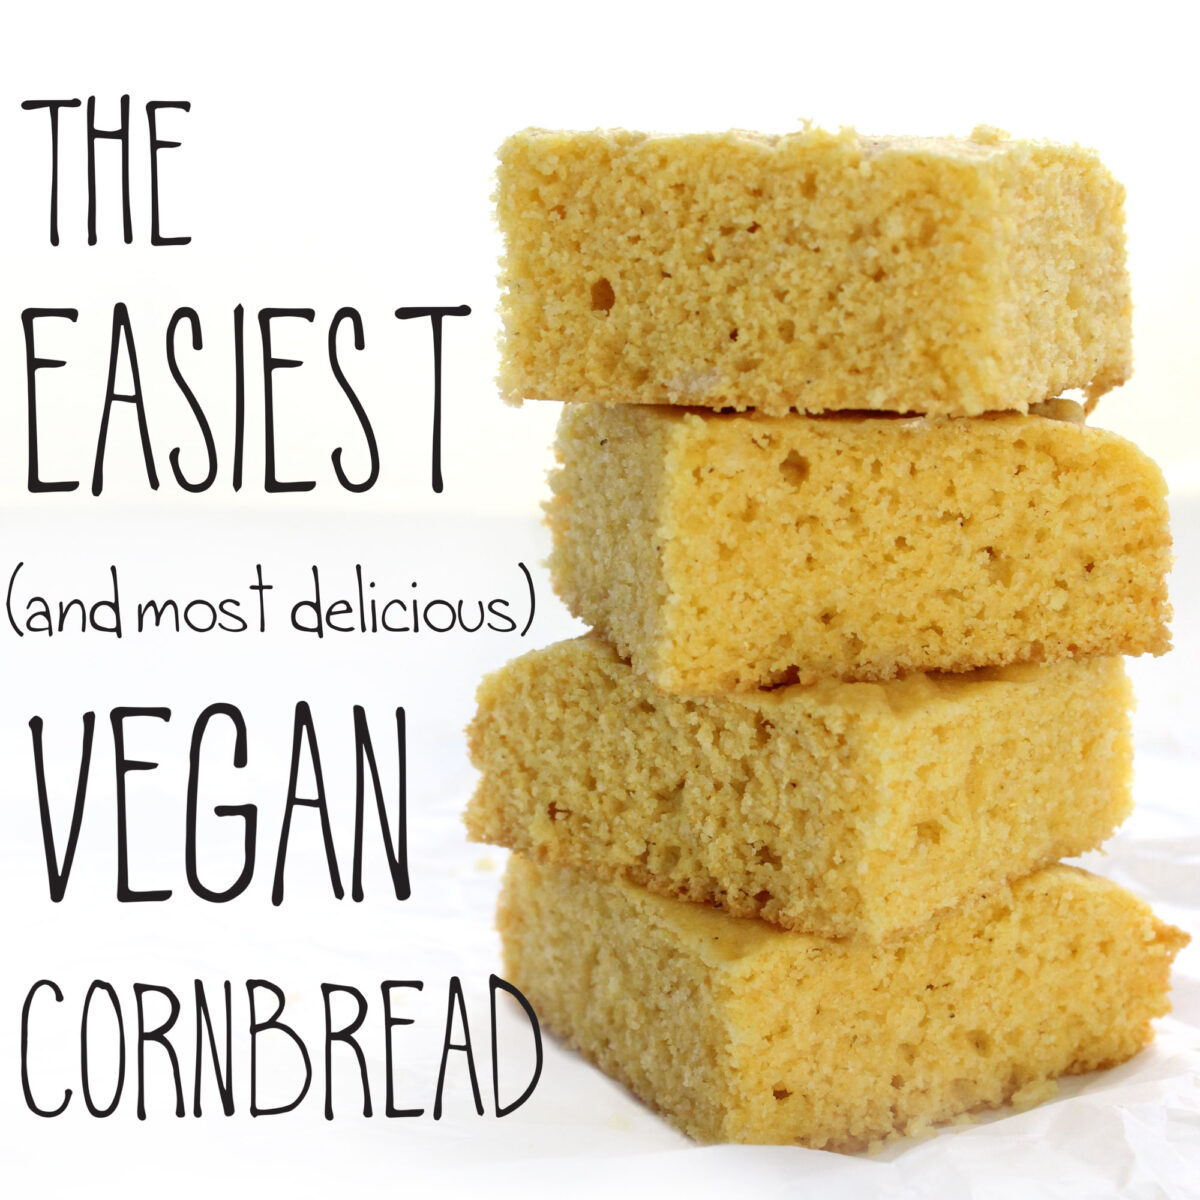 The Easiest (and most delicious) Vegan Cornbread